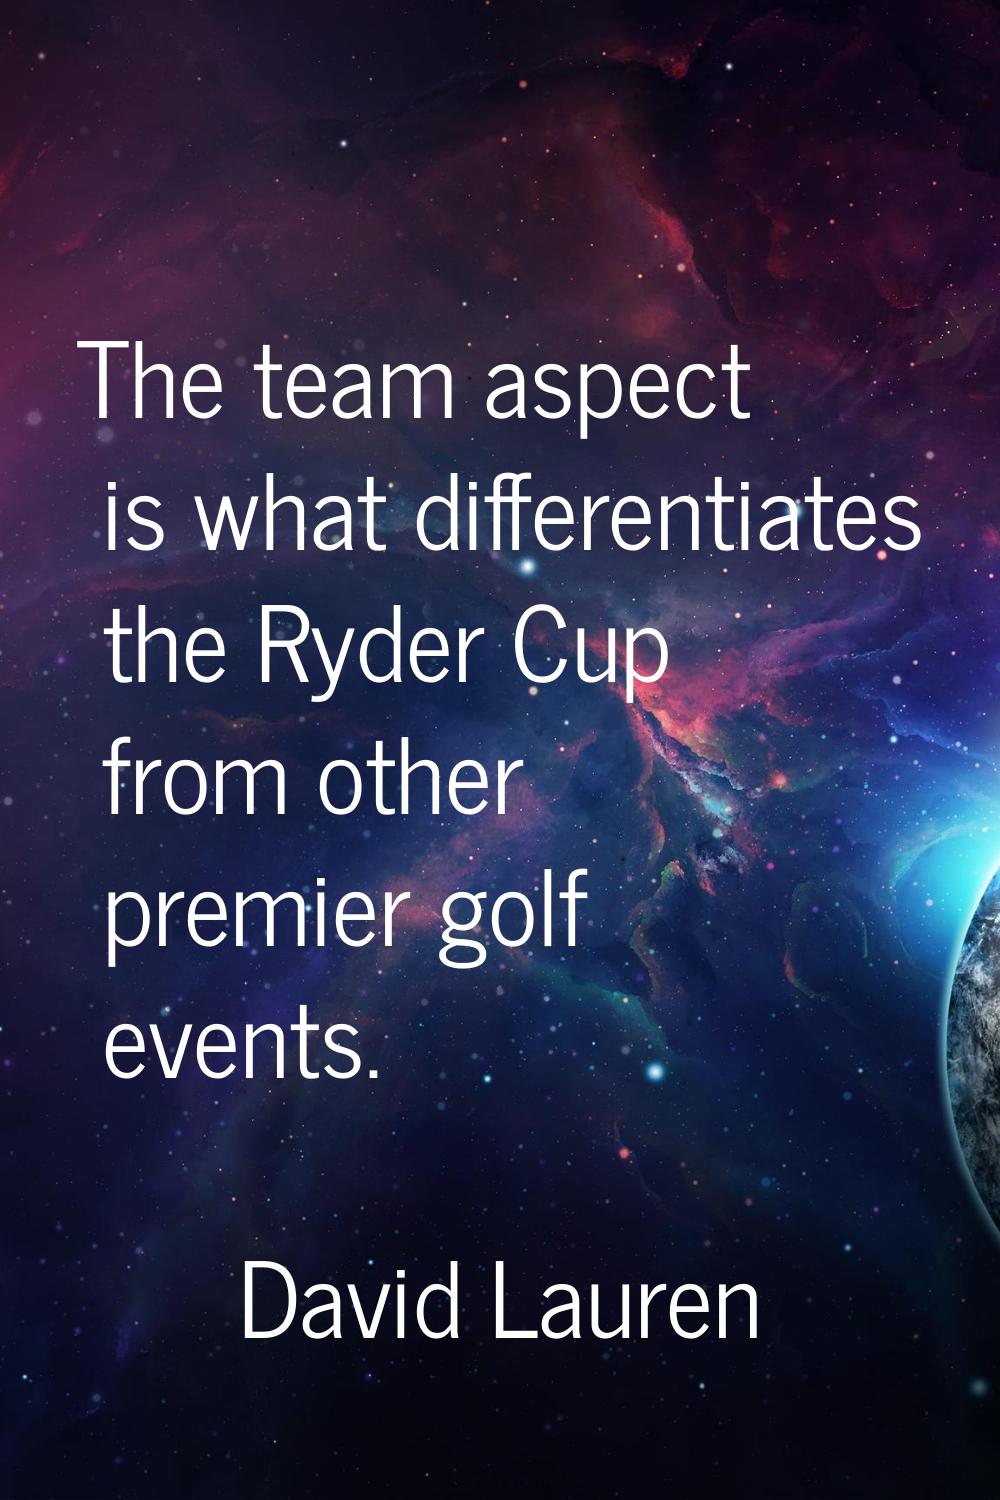 The team aspect is what differentiates the Ryder Cup from other premier golf events.